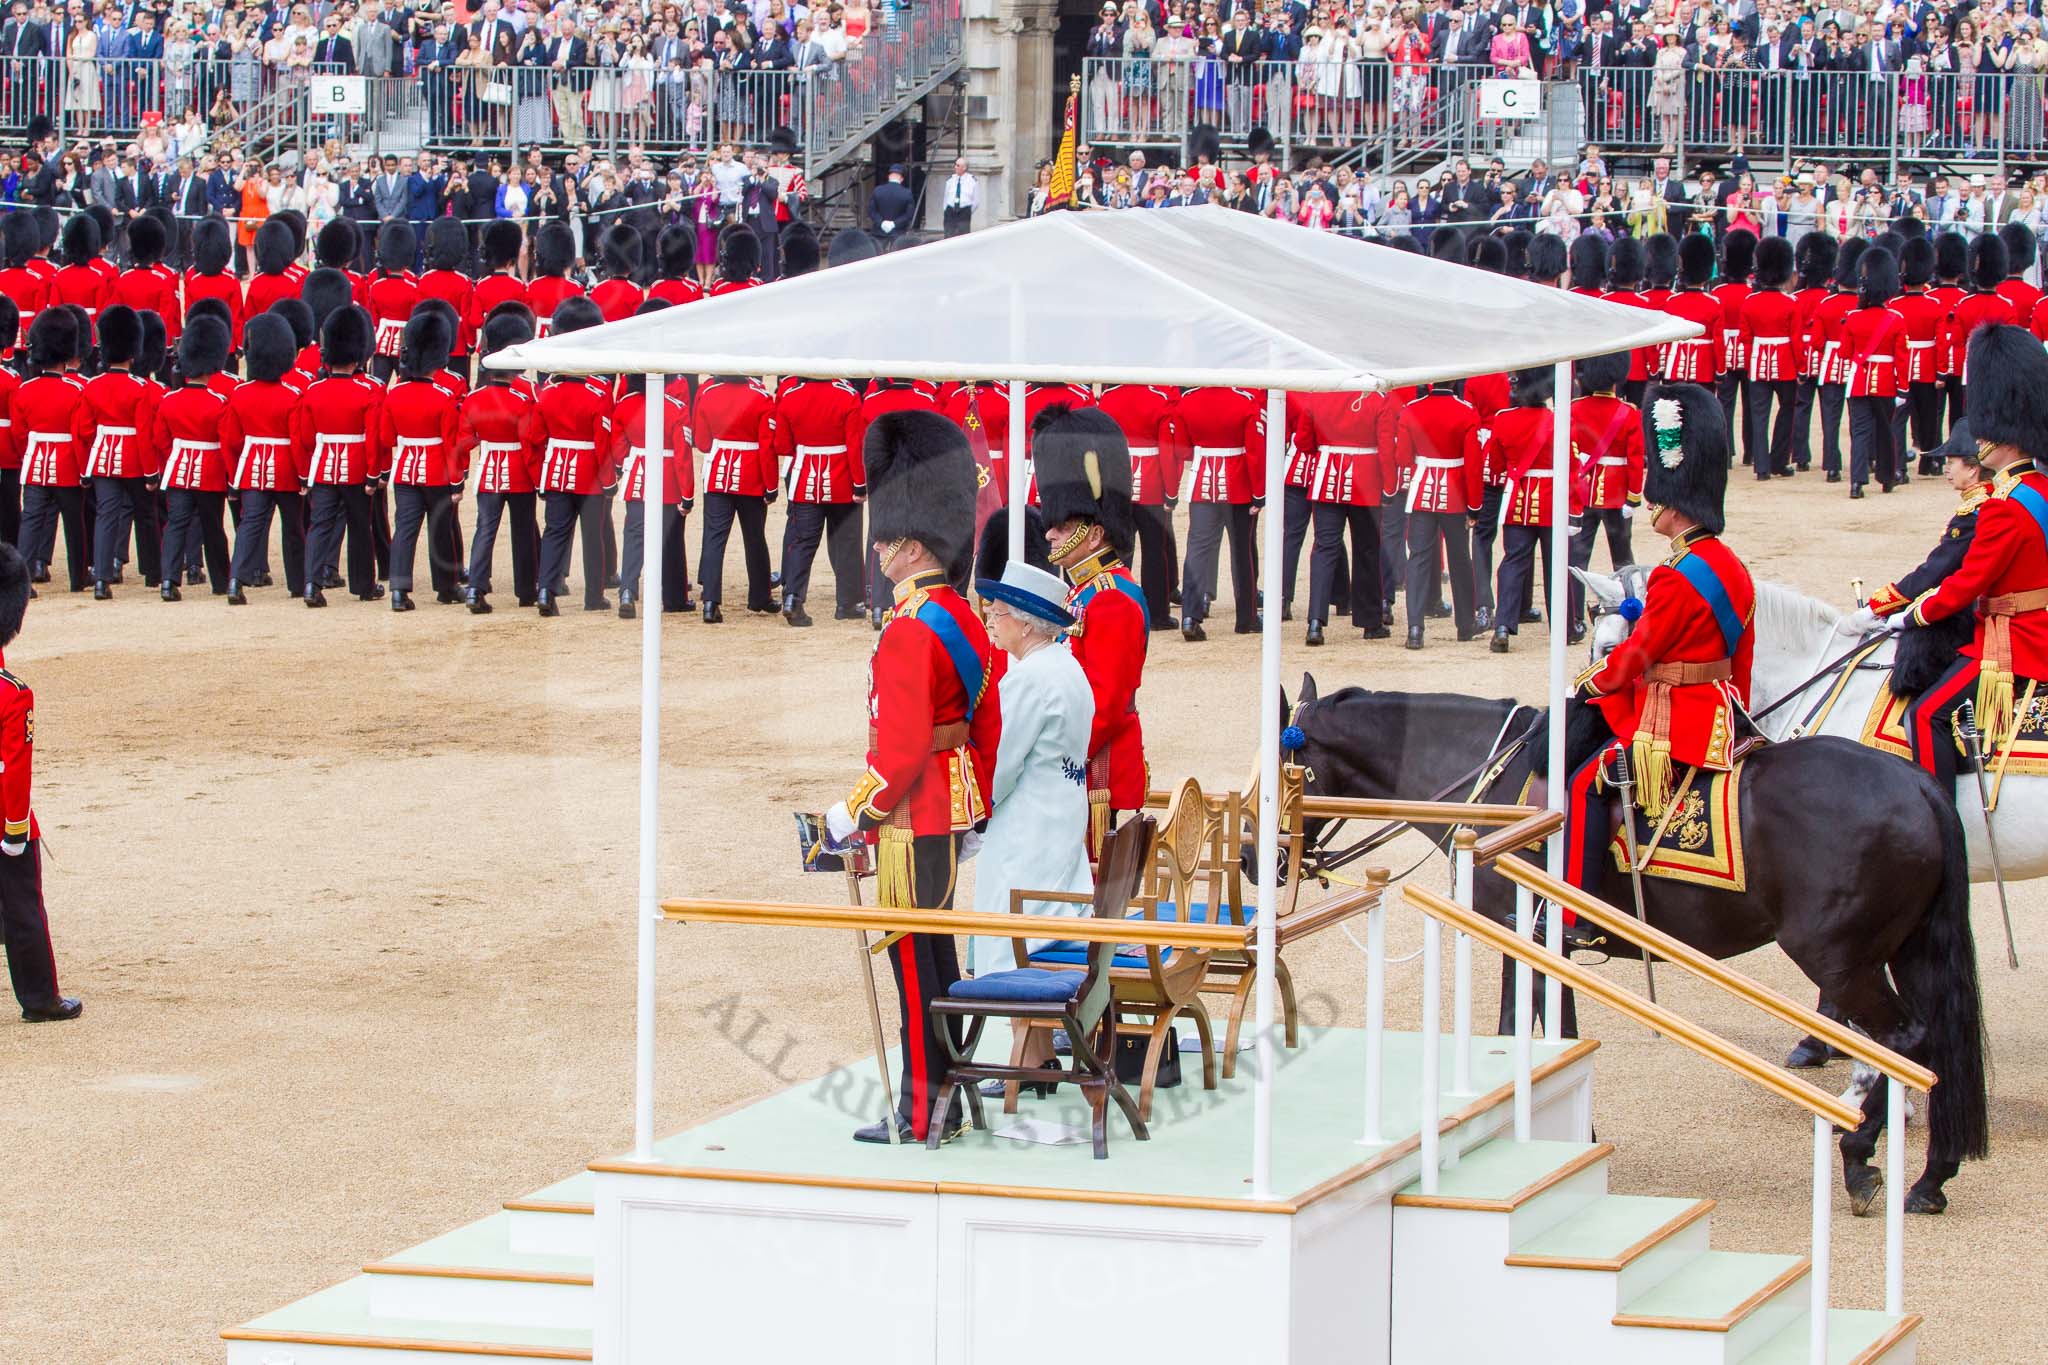 Trooping the Colour 2014.
Horse Guards Parade, Westminster,
London SW1A,

United Kingdom,
on 14 June 2014 at 11:39, image #644